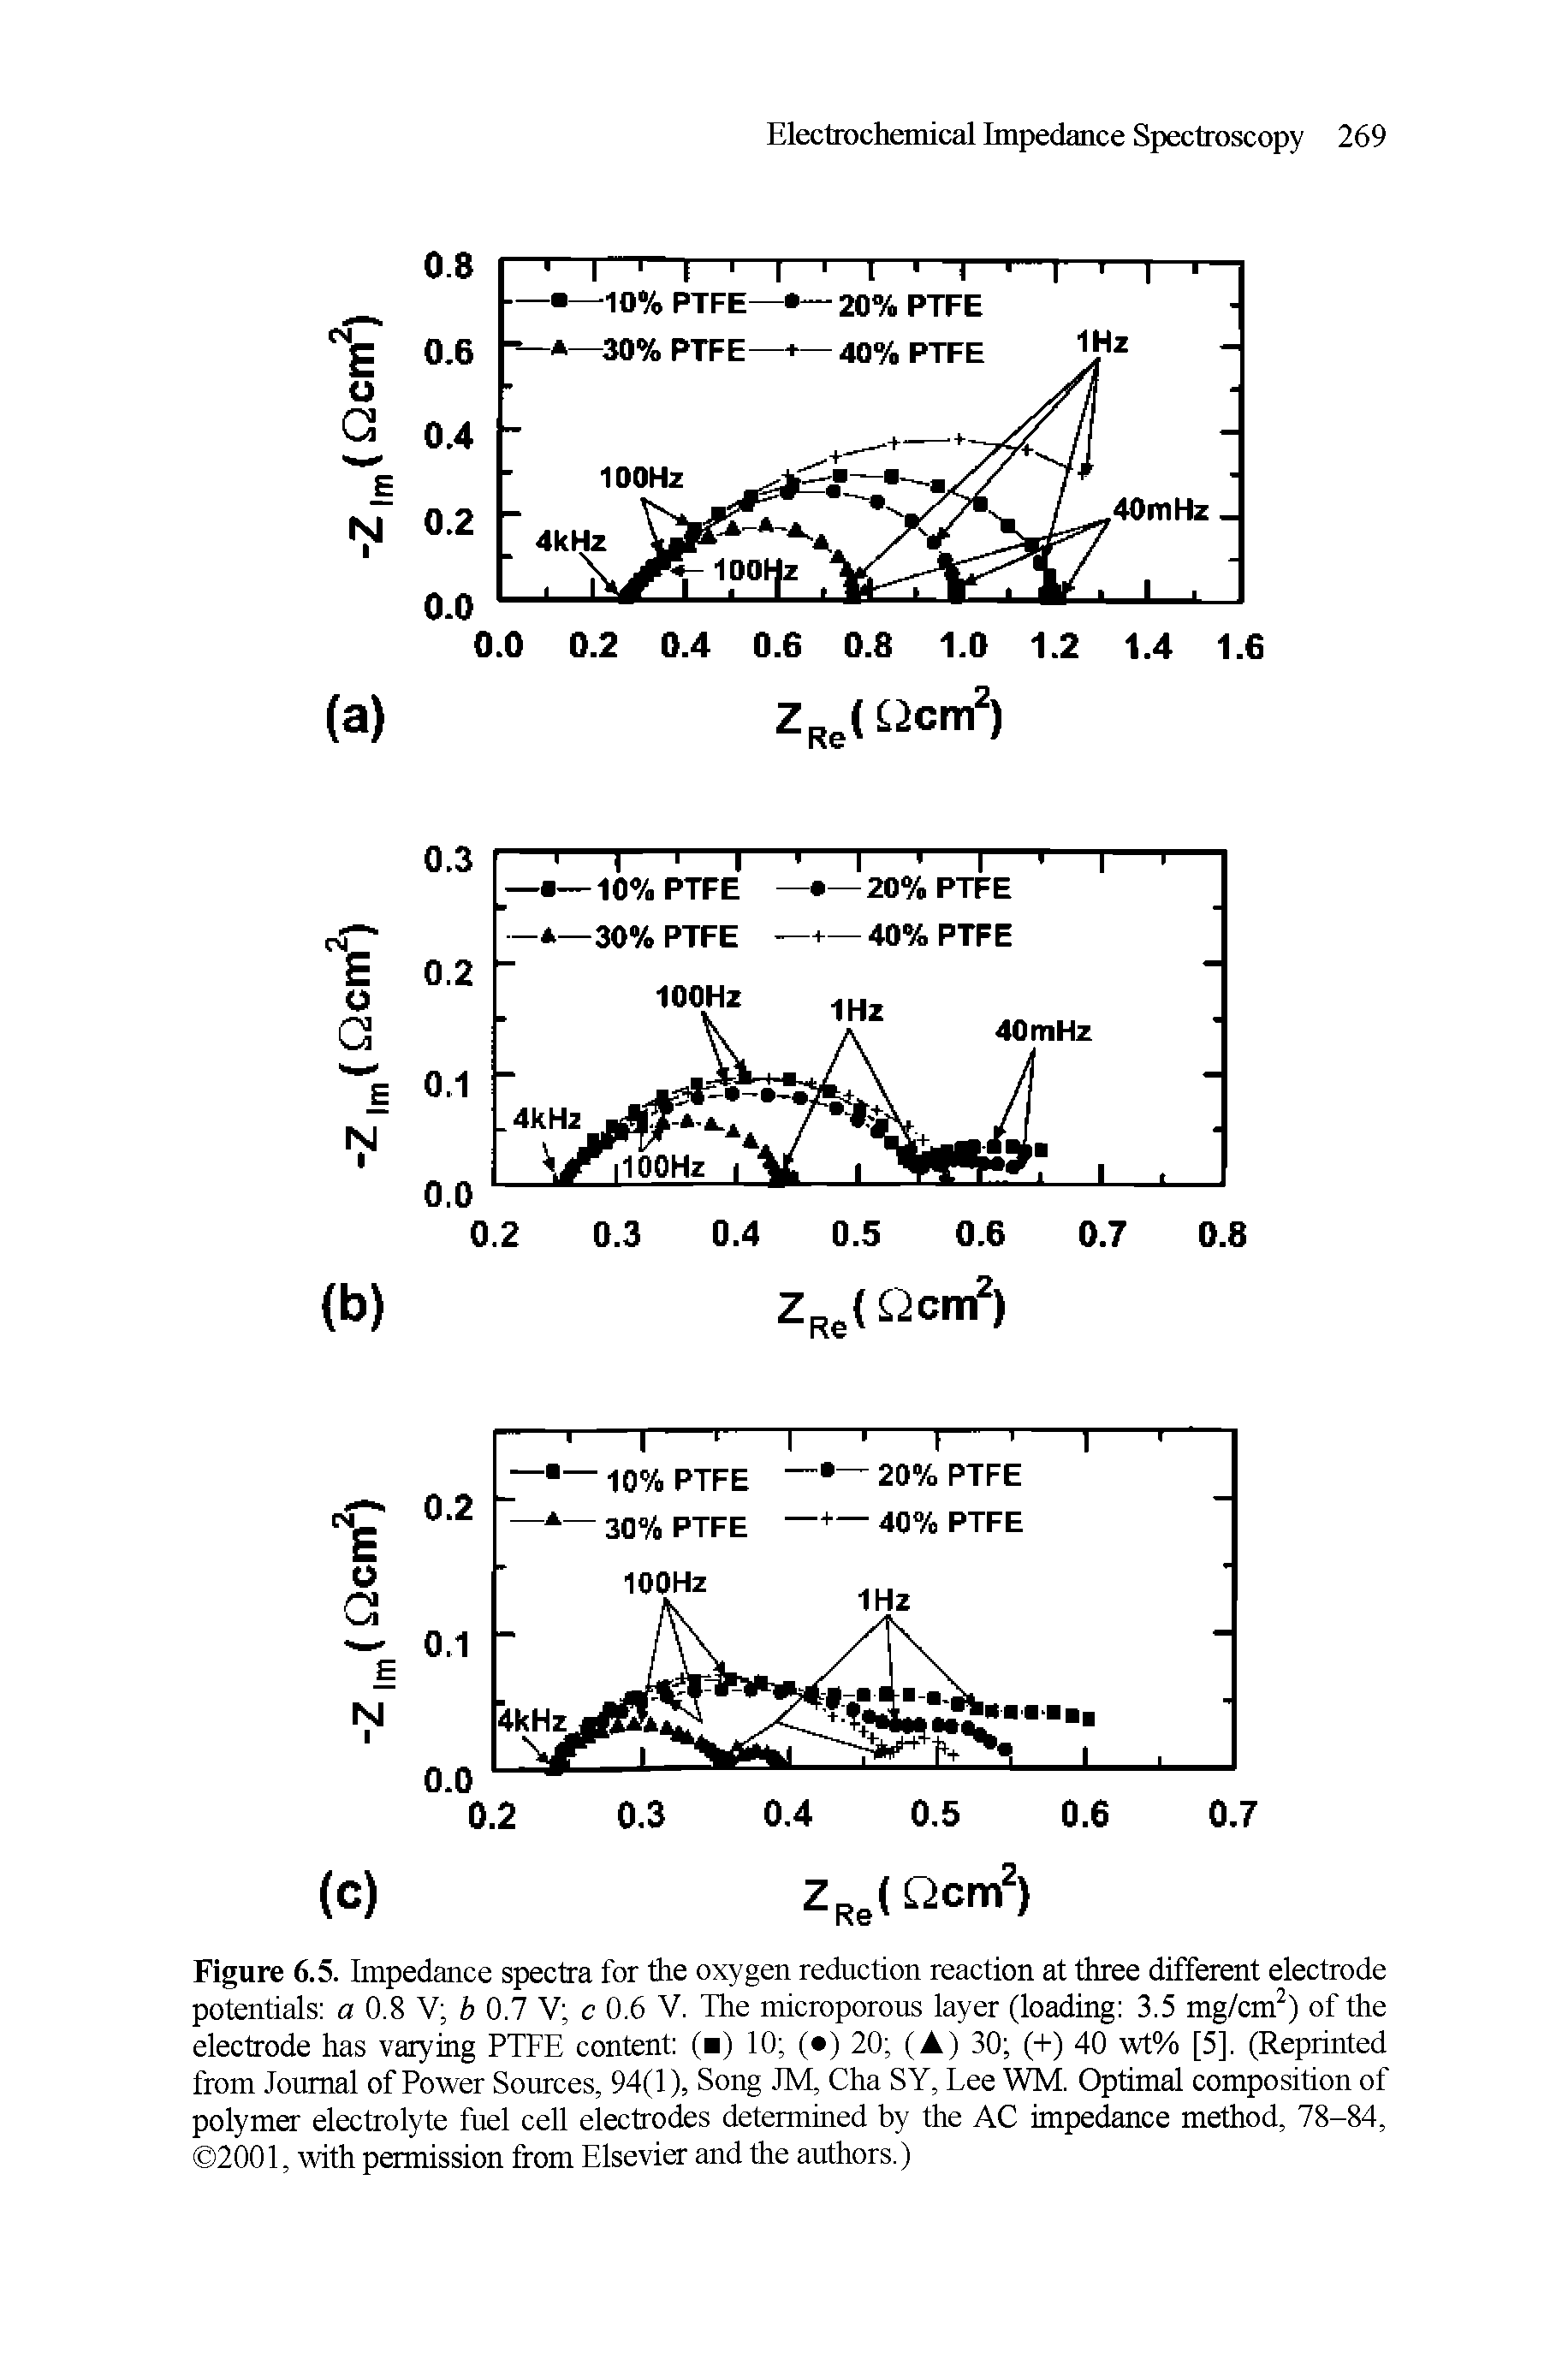 Figure 6.5. Impedance spectra for the oxygen reduction reaction at three different electrode potentials a 0.8 V b 0.7 V c 0.6 V. The microporous layer (loading 3.5 mg/cm2) of the electrode has varying PTFE content ( ) 10 ( ) 20 (A) 30 (+) 40 wt% [5], (Reprinted from Journal of Power Sources, 94(1), Song JM, Cha SY, Lee WM. Optimal composition of polymer electrolyte fuel cell electrodes determined by the AC impedance method, 78-84, 2001, with permission from Elsevier and the authors.)...